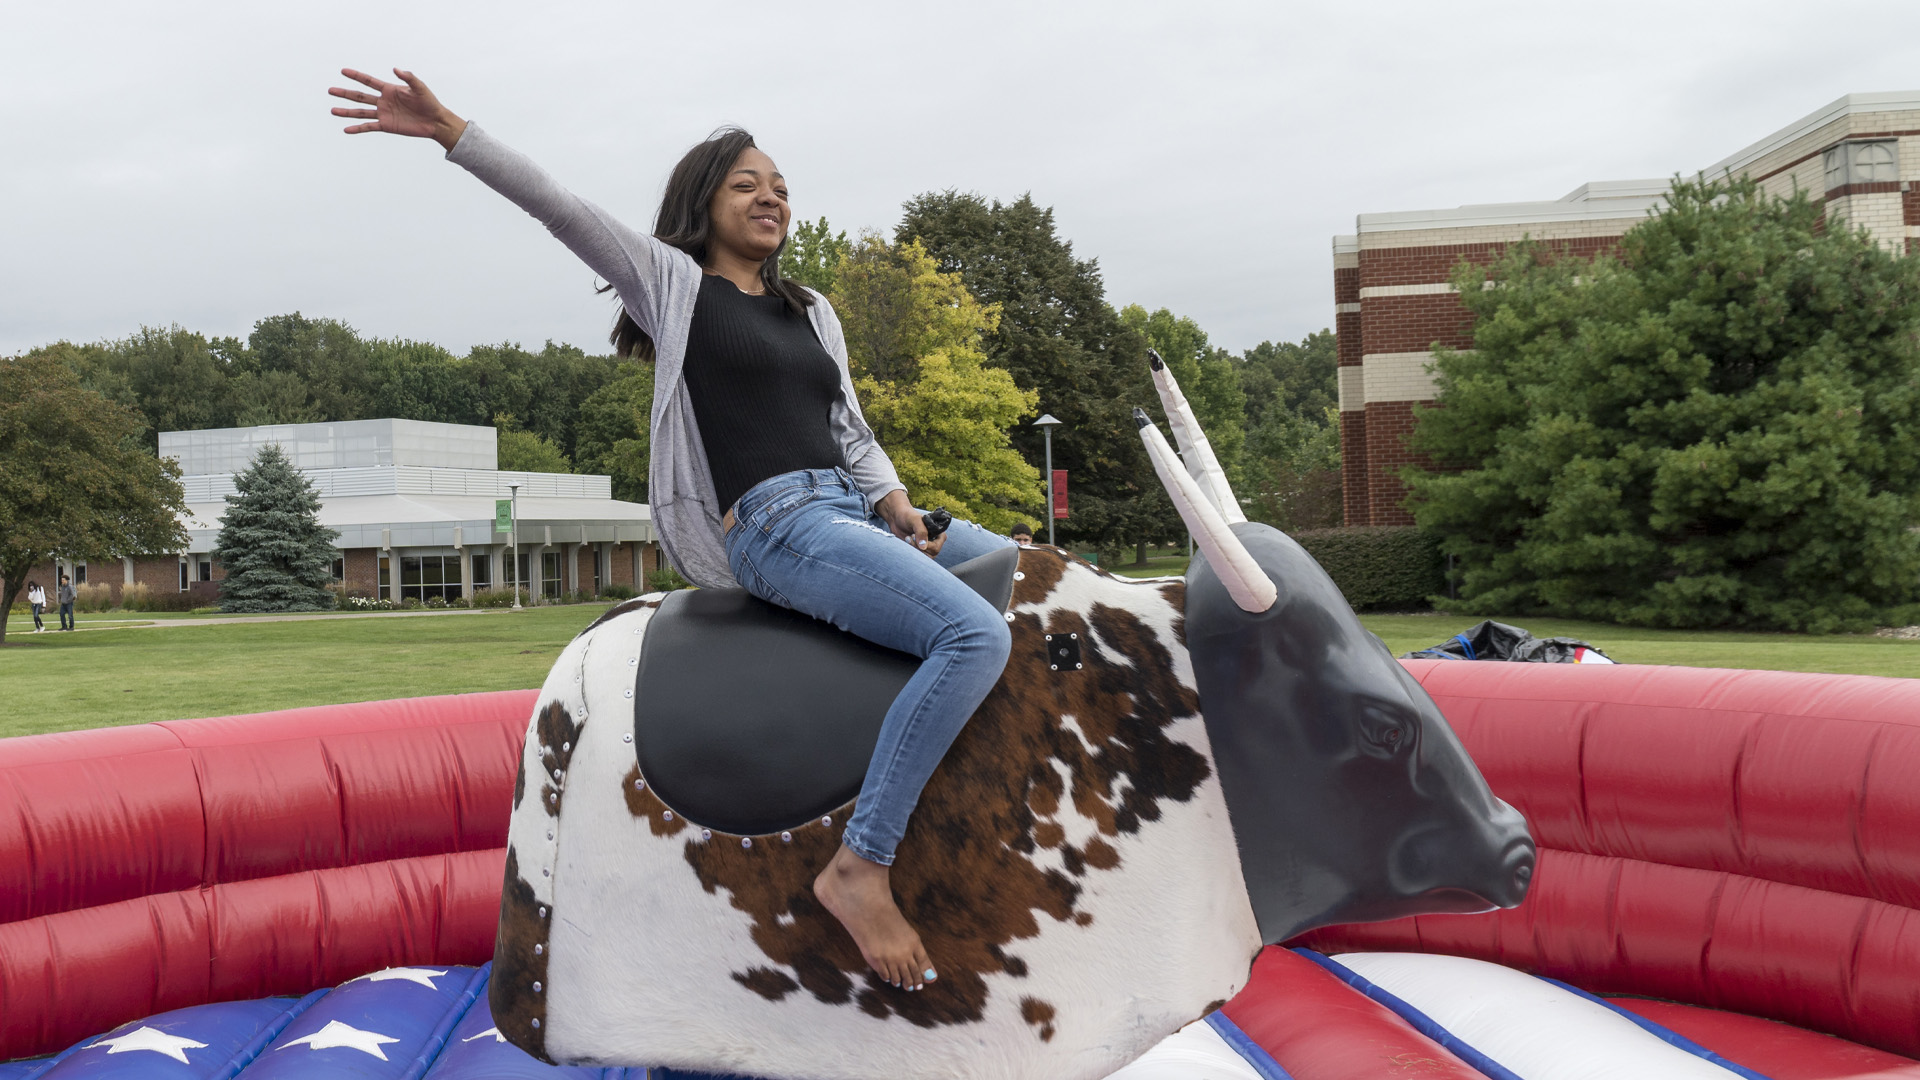 Student riding a mechanical bull during campus bash